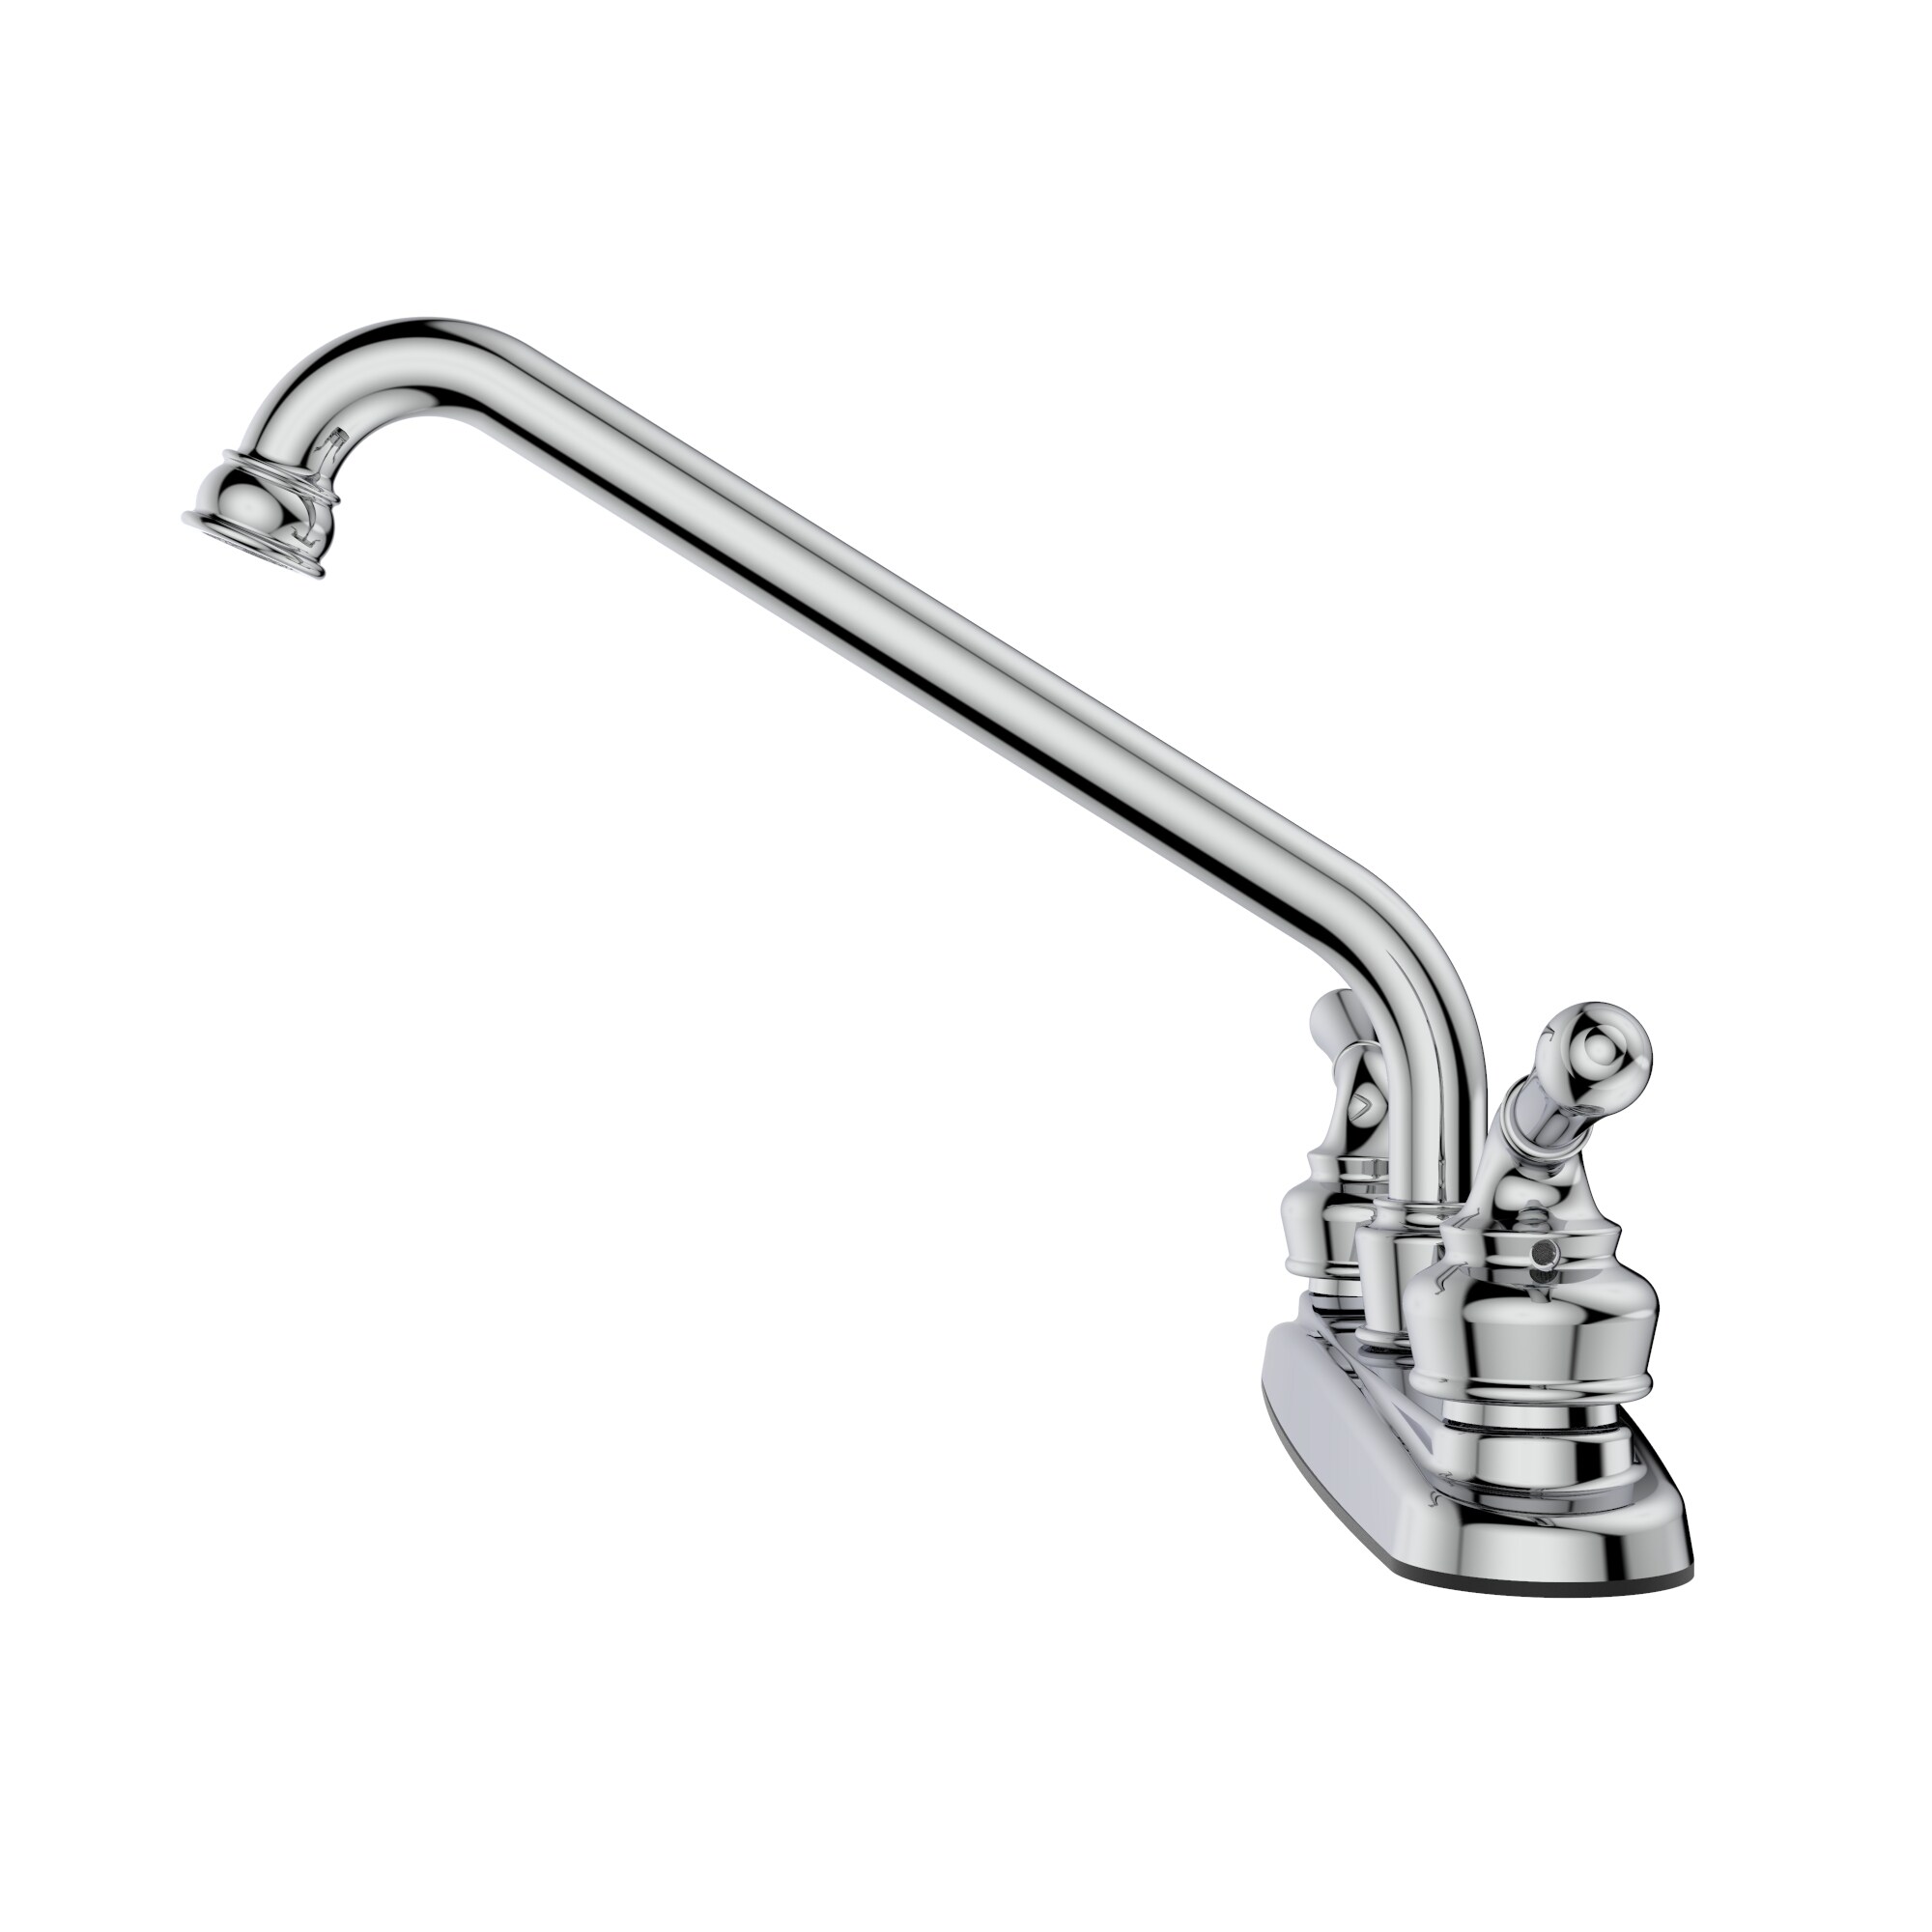 Belanger 21 Series Polished Chrome 2-handle Low-arc Kitchen Faucet (Deck Plate Included)